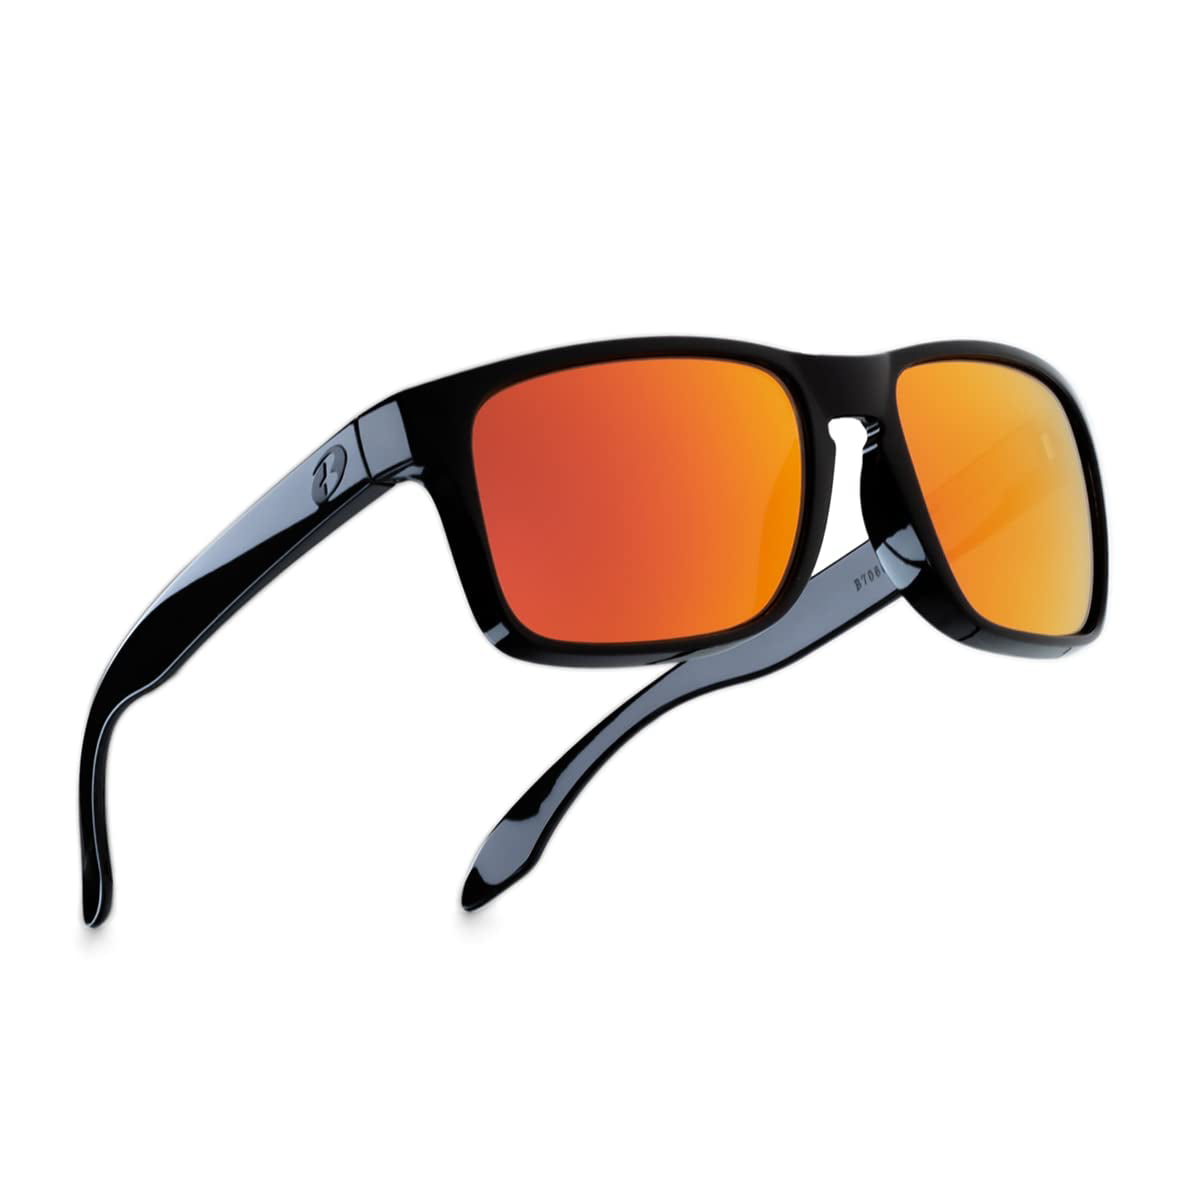 Rebell Sport Cycling Sunglasses BRAND NEW MADE IN ITALY UV 400 